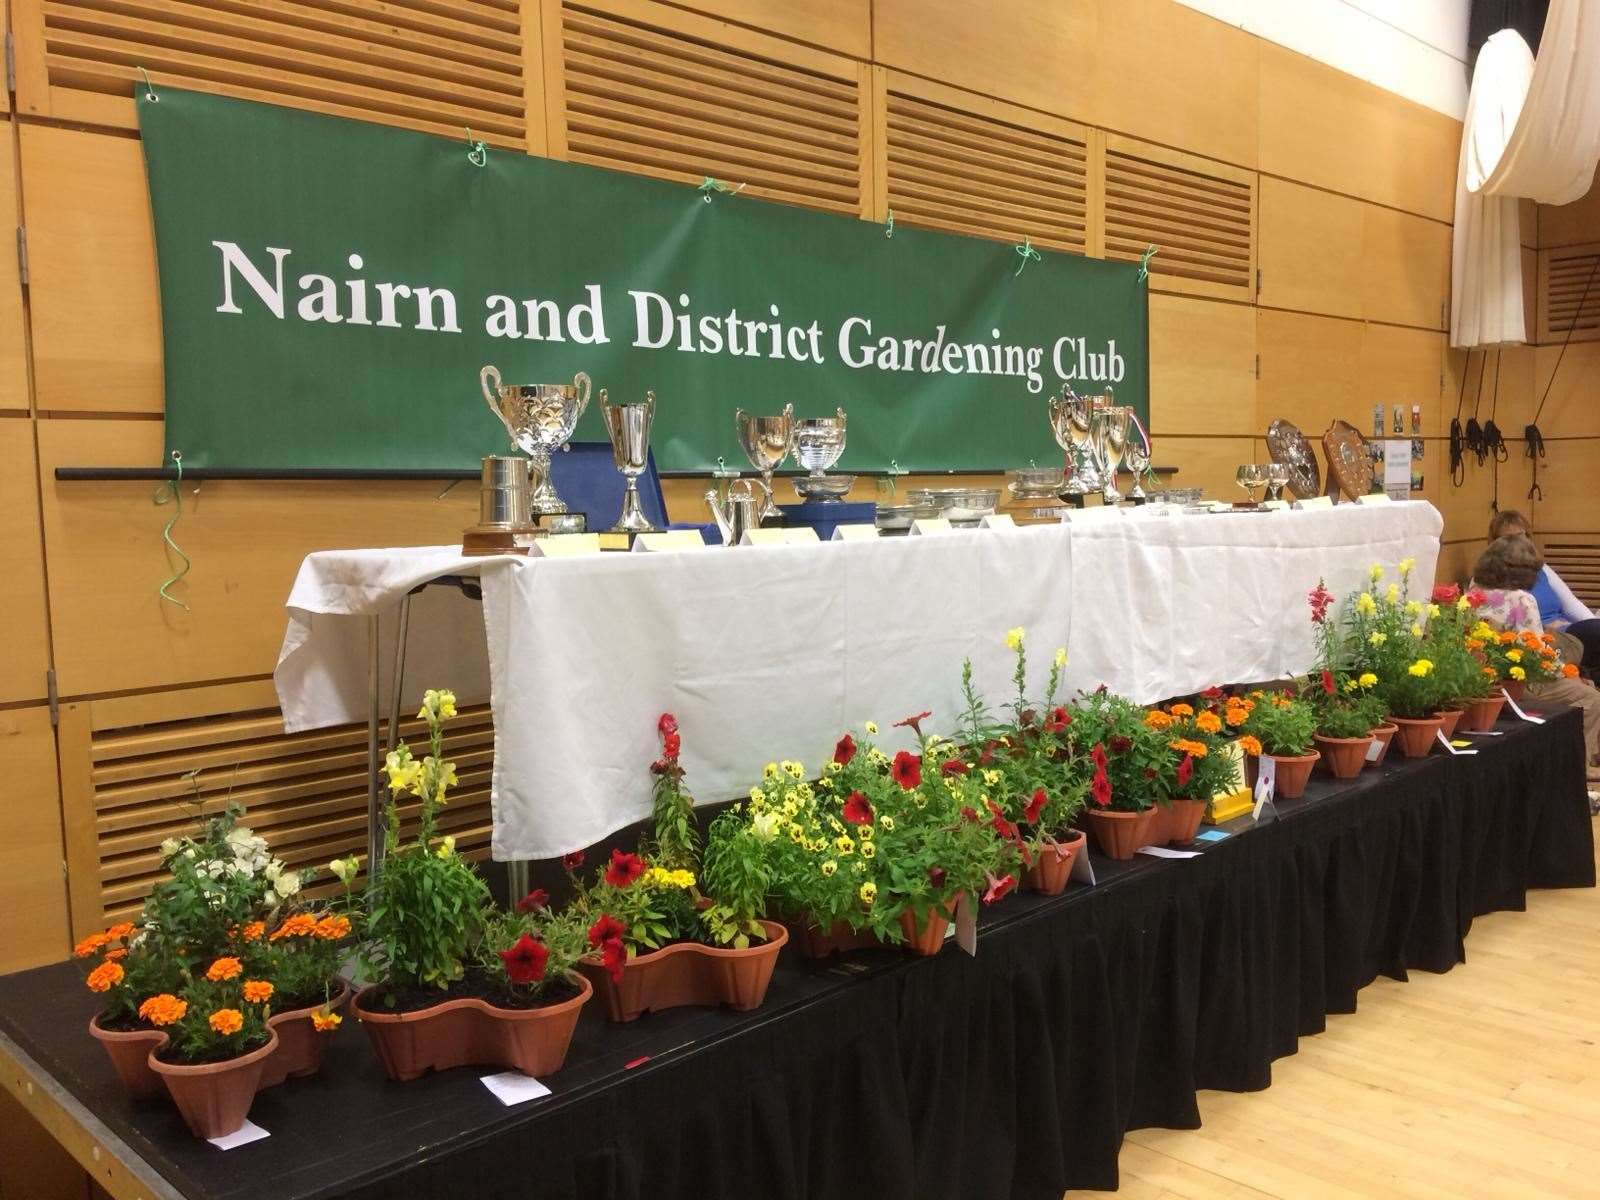 The gardening show always attracts a wide range of entries.